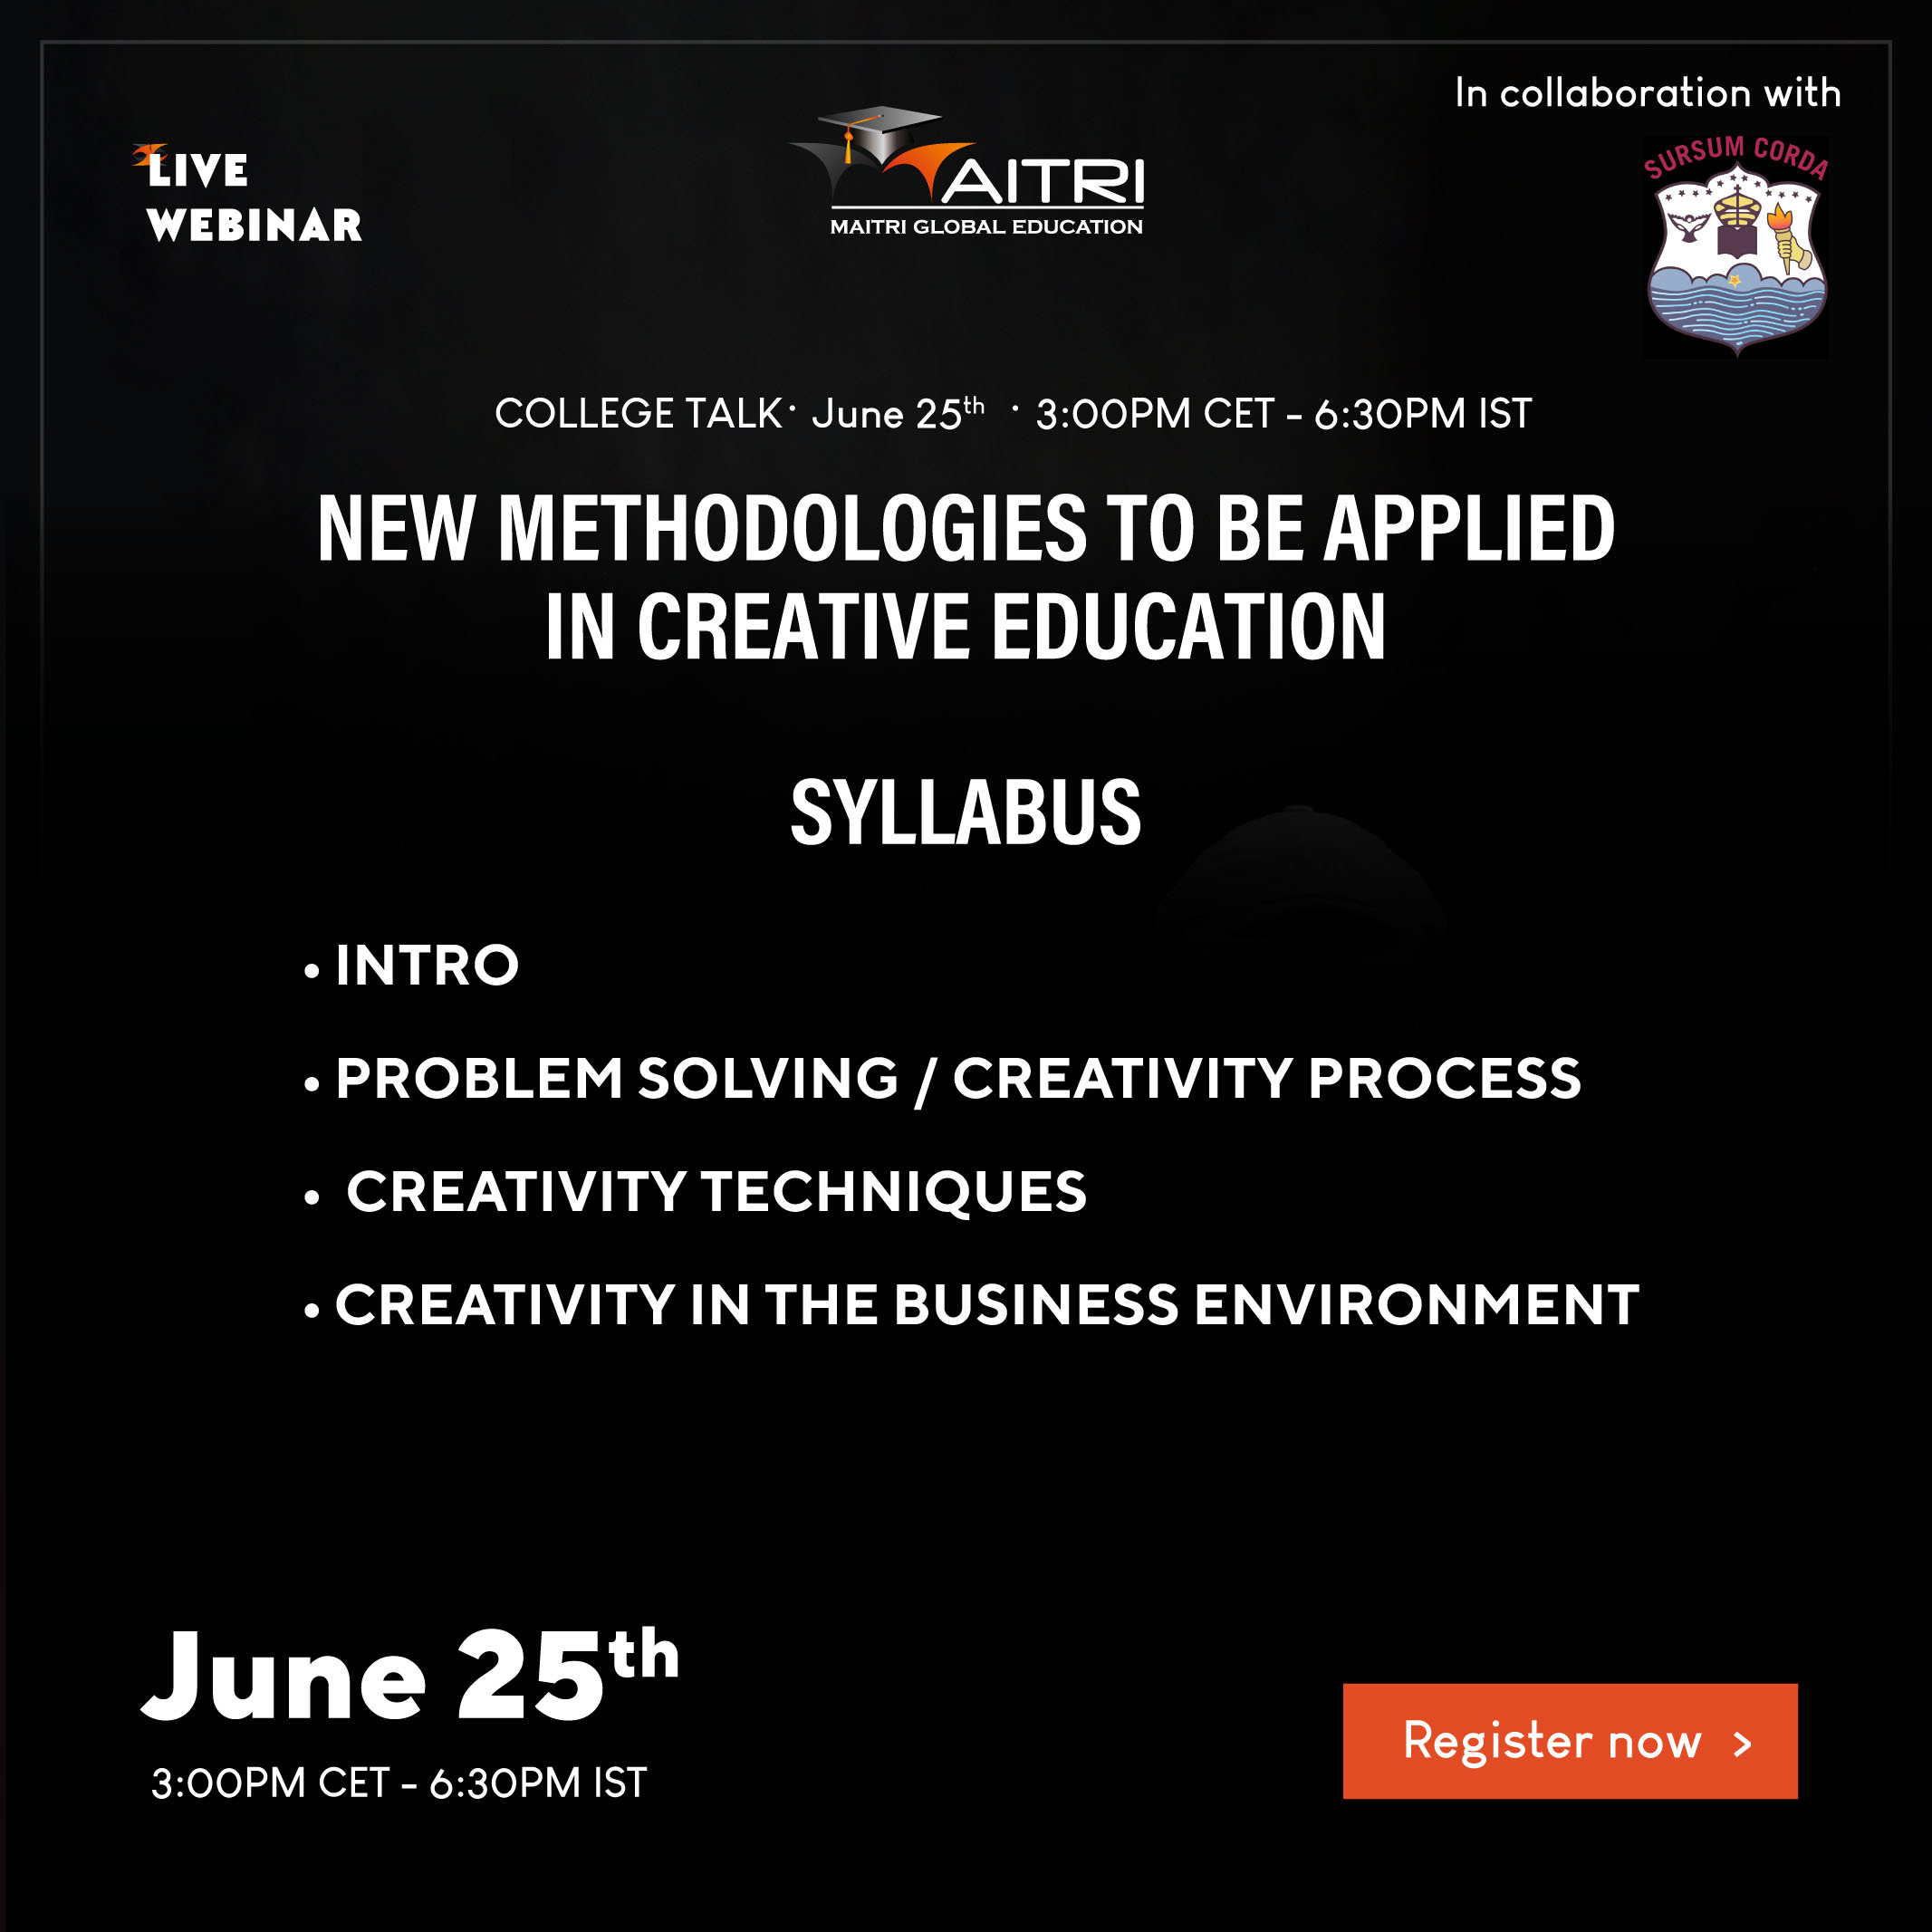 NEW METHODOLOGIES TO BE APPLIED IN CREATIVE EDUCATION